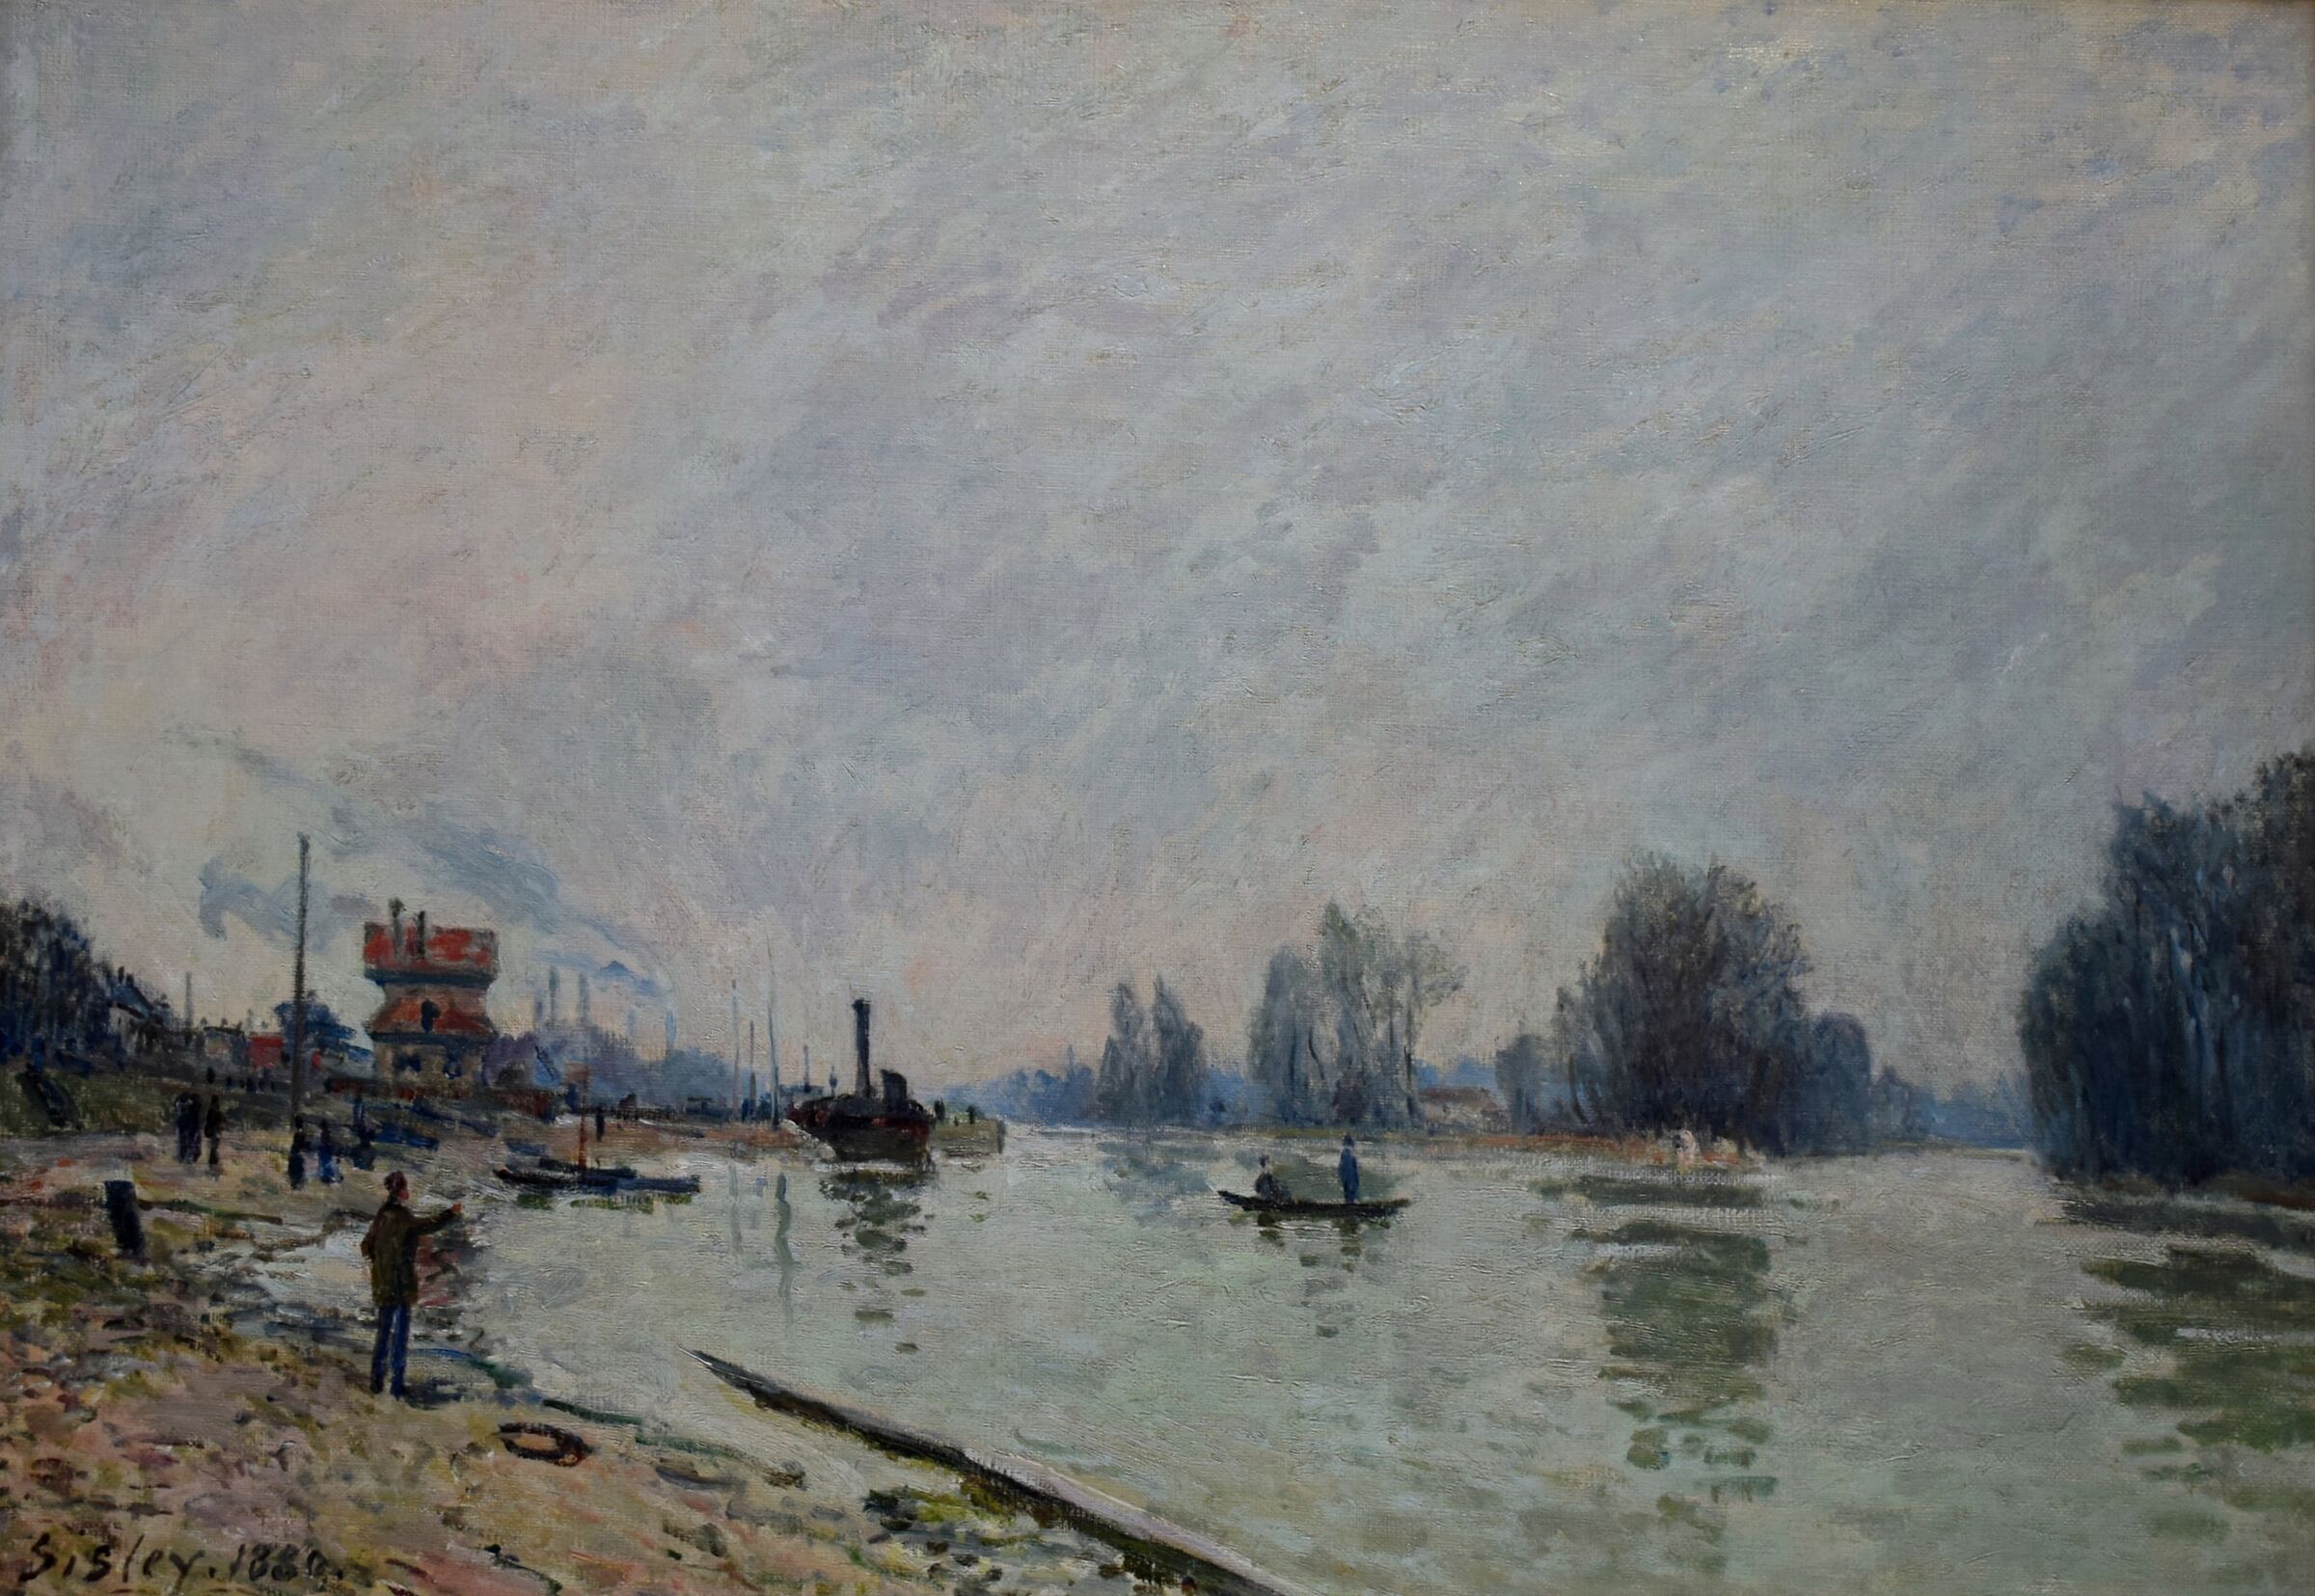 Alfred Sisley "The Seine at Suresnes" 1880...